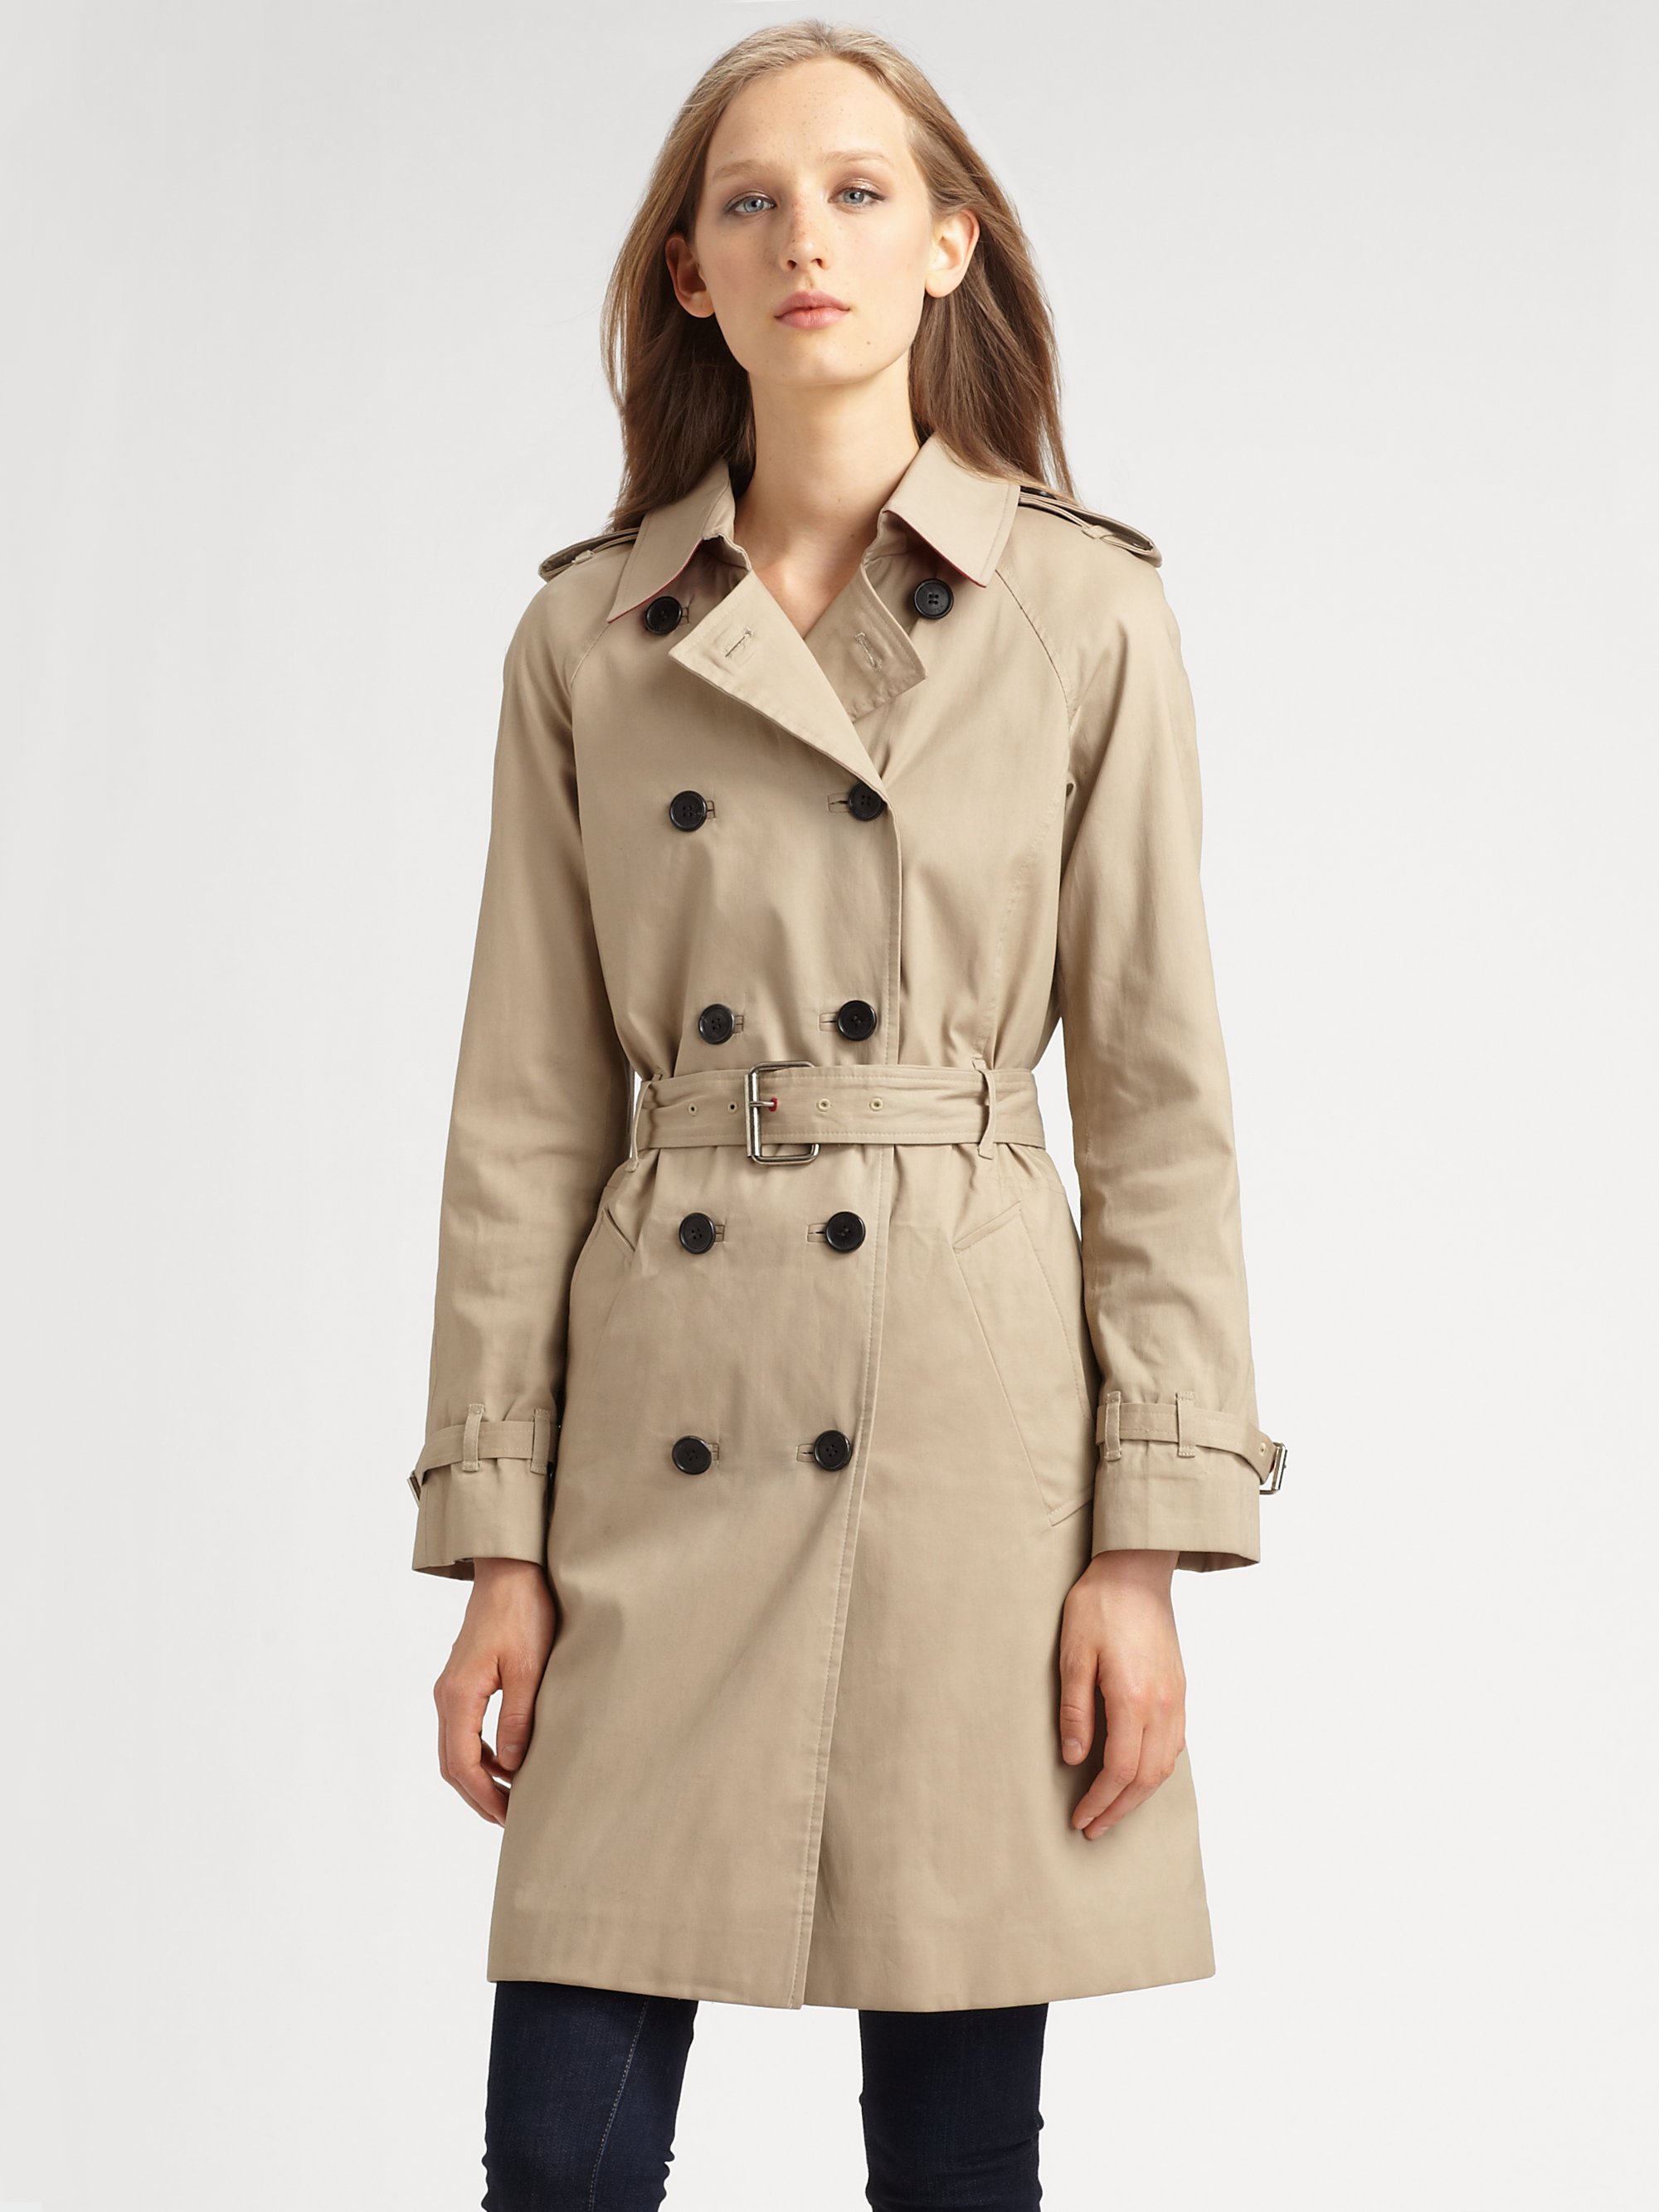 HUNTER Double Breasted Trench coat in Beige (Natural) - Lyst